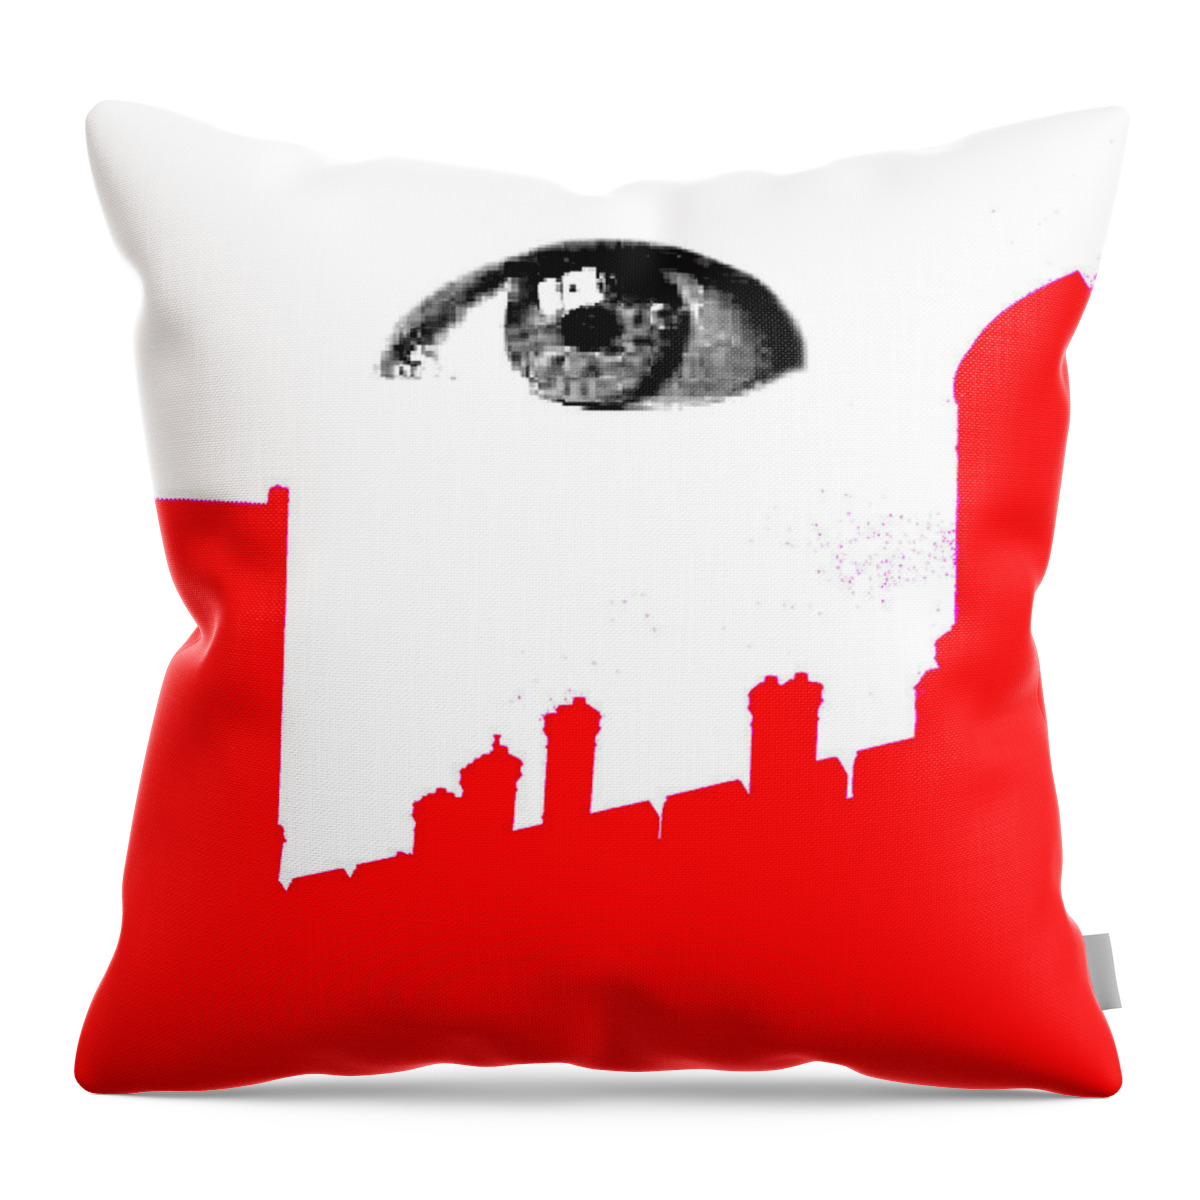 #abstracts #acrylic #artgallery # #artist #artnews # #artwork # #callforart #callforentries #colour #creative # #paint #painting #paintings #photograph #photography #photoshoot #photoshop #photoshopped Throw Pillow featuring the digital art Beyond The Horizon Part 74 by The Lovelock experience